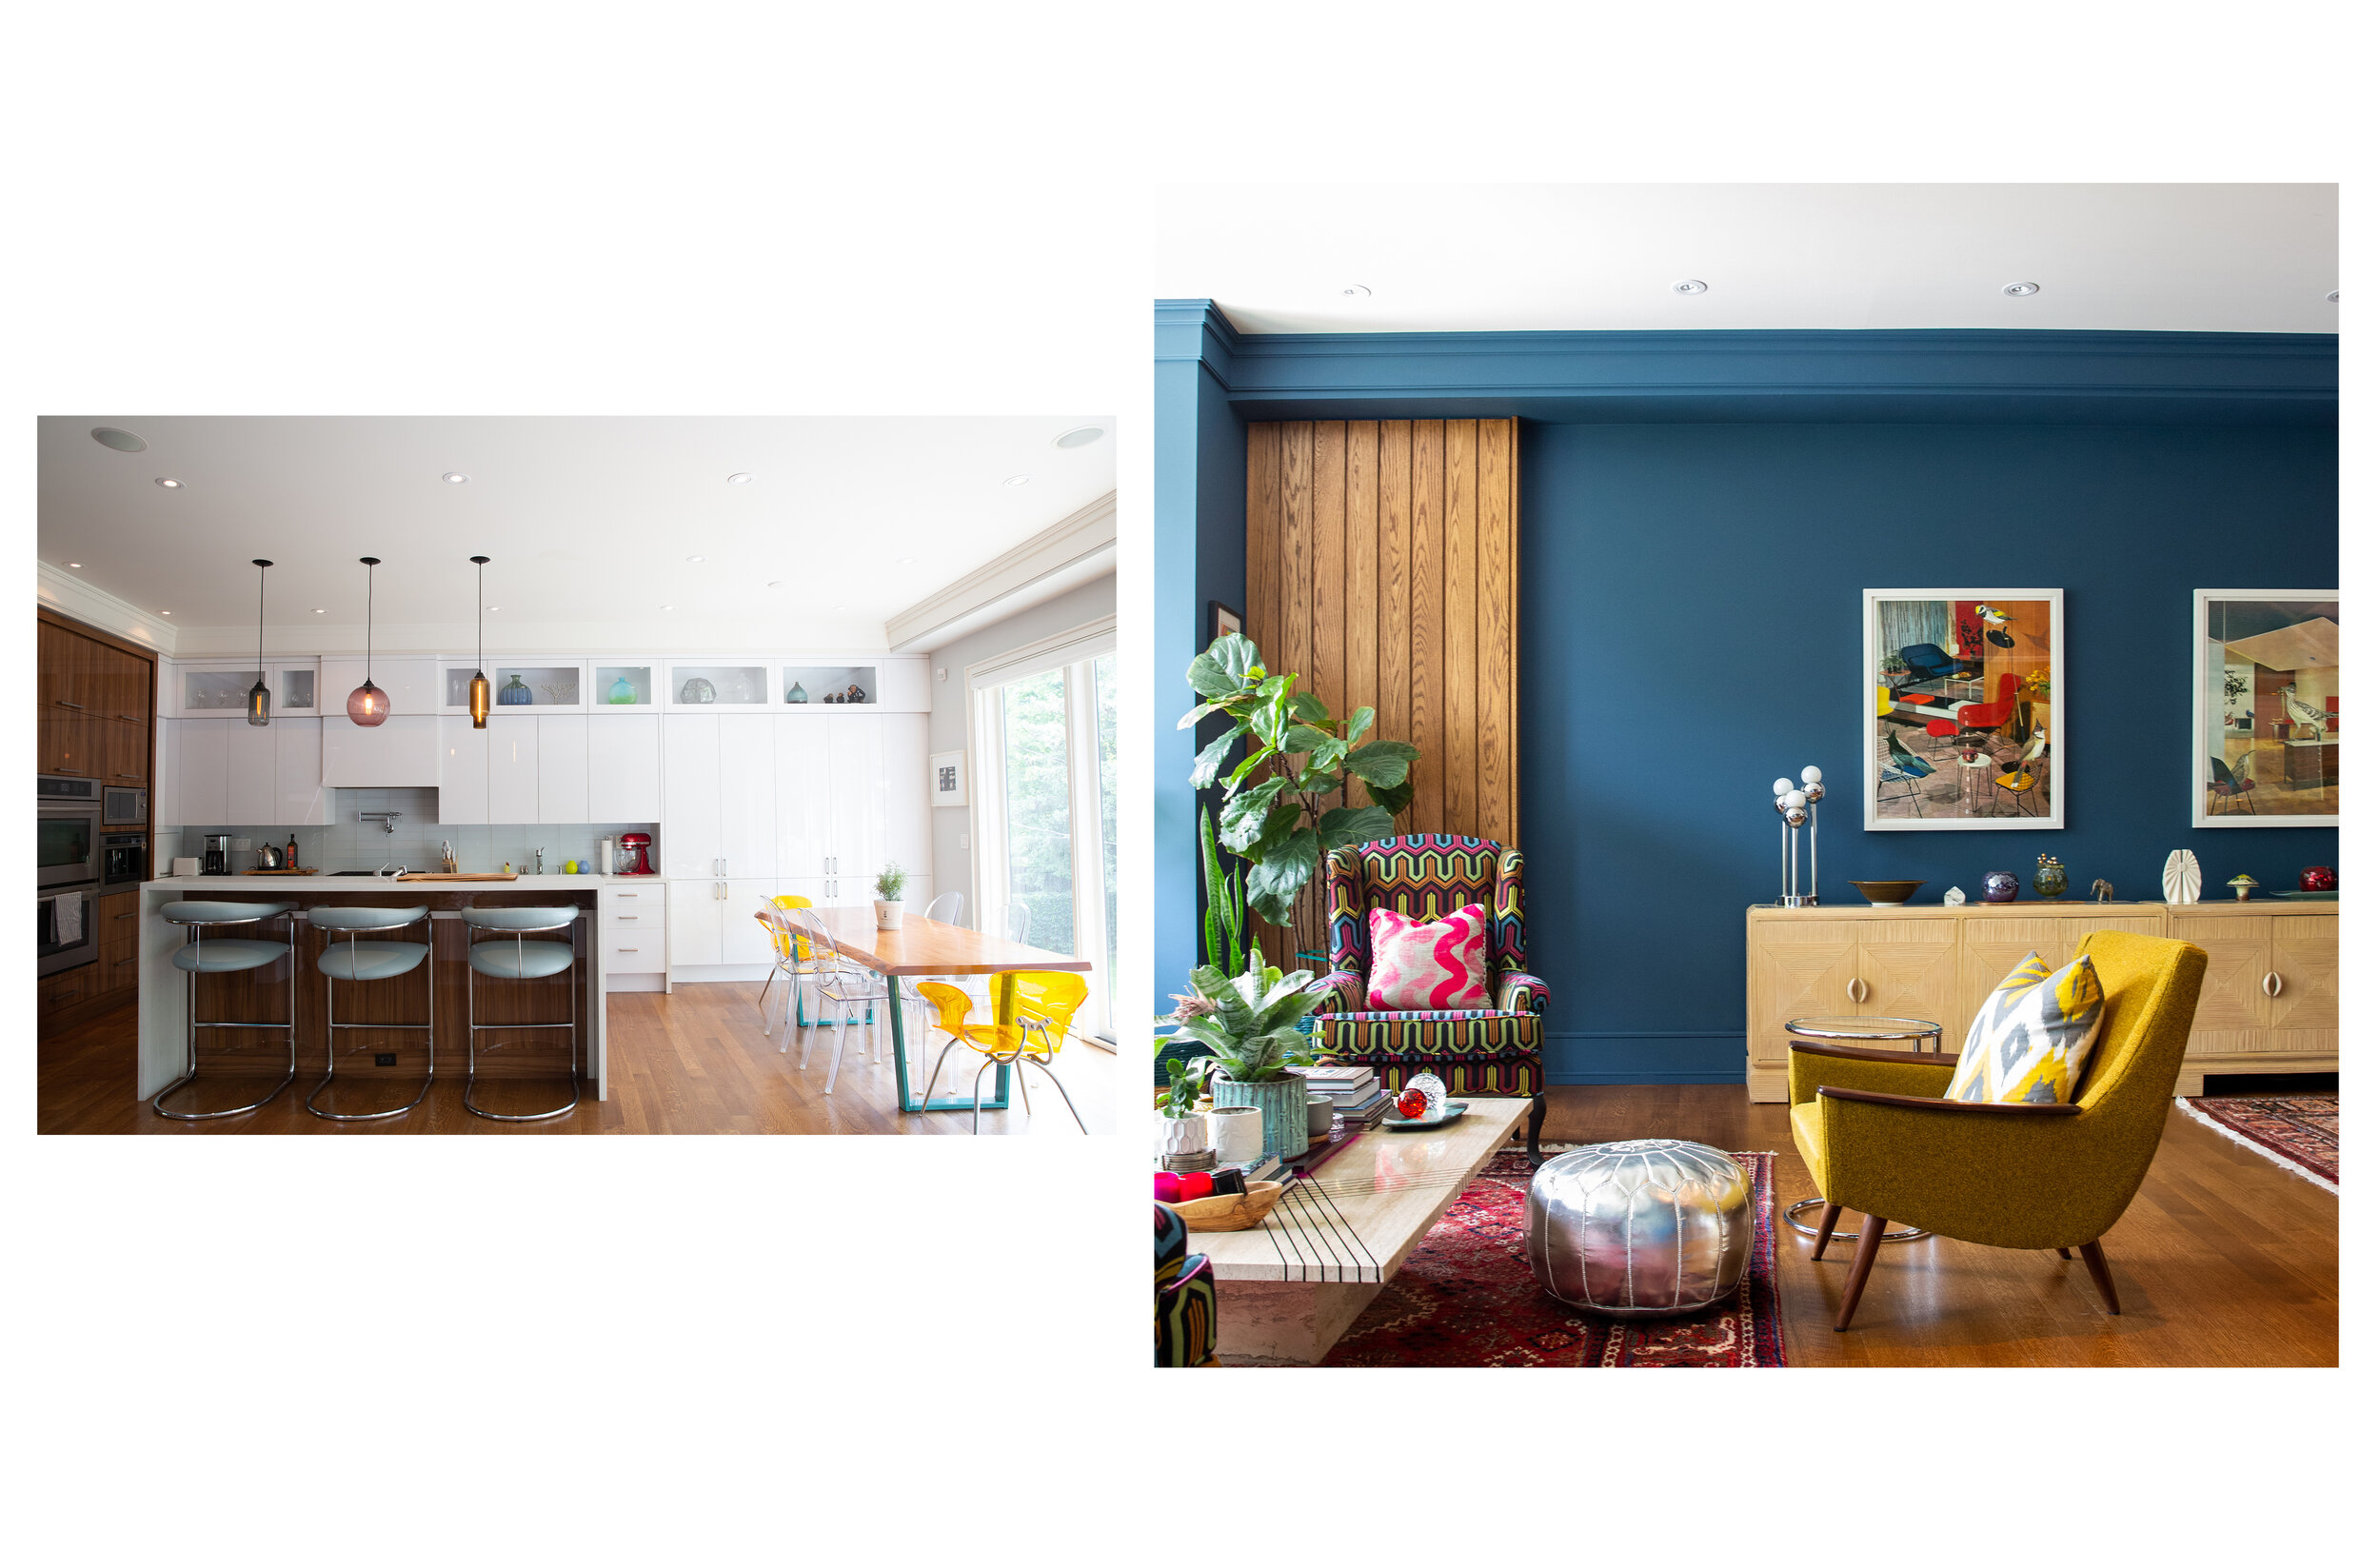  Publication: Apartment Therapy Featured in:  This Colorful Home Shows How to Add Personality to a Cookie-Cutter New Build  